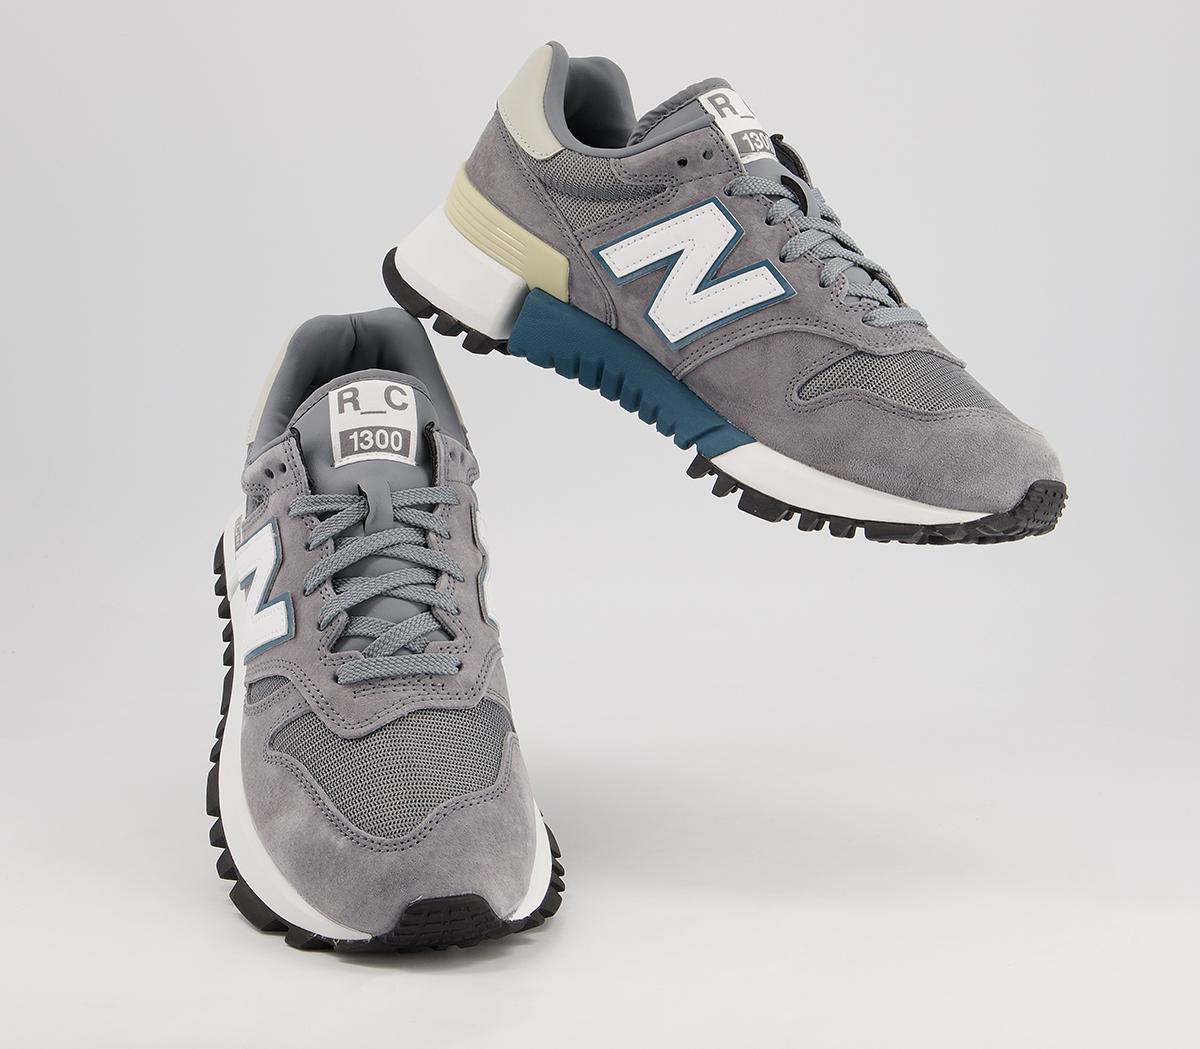 New Balance Rc1300 Trainers Grey Grey - His trainers